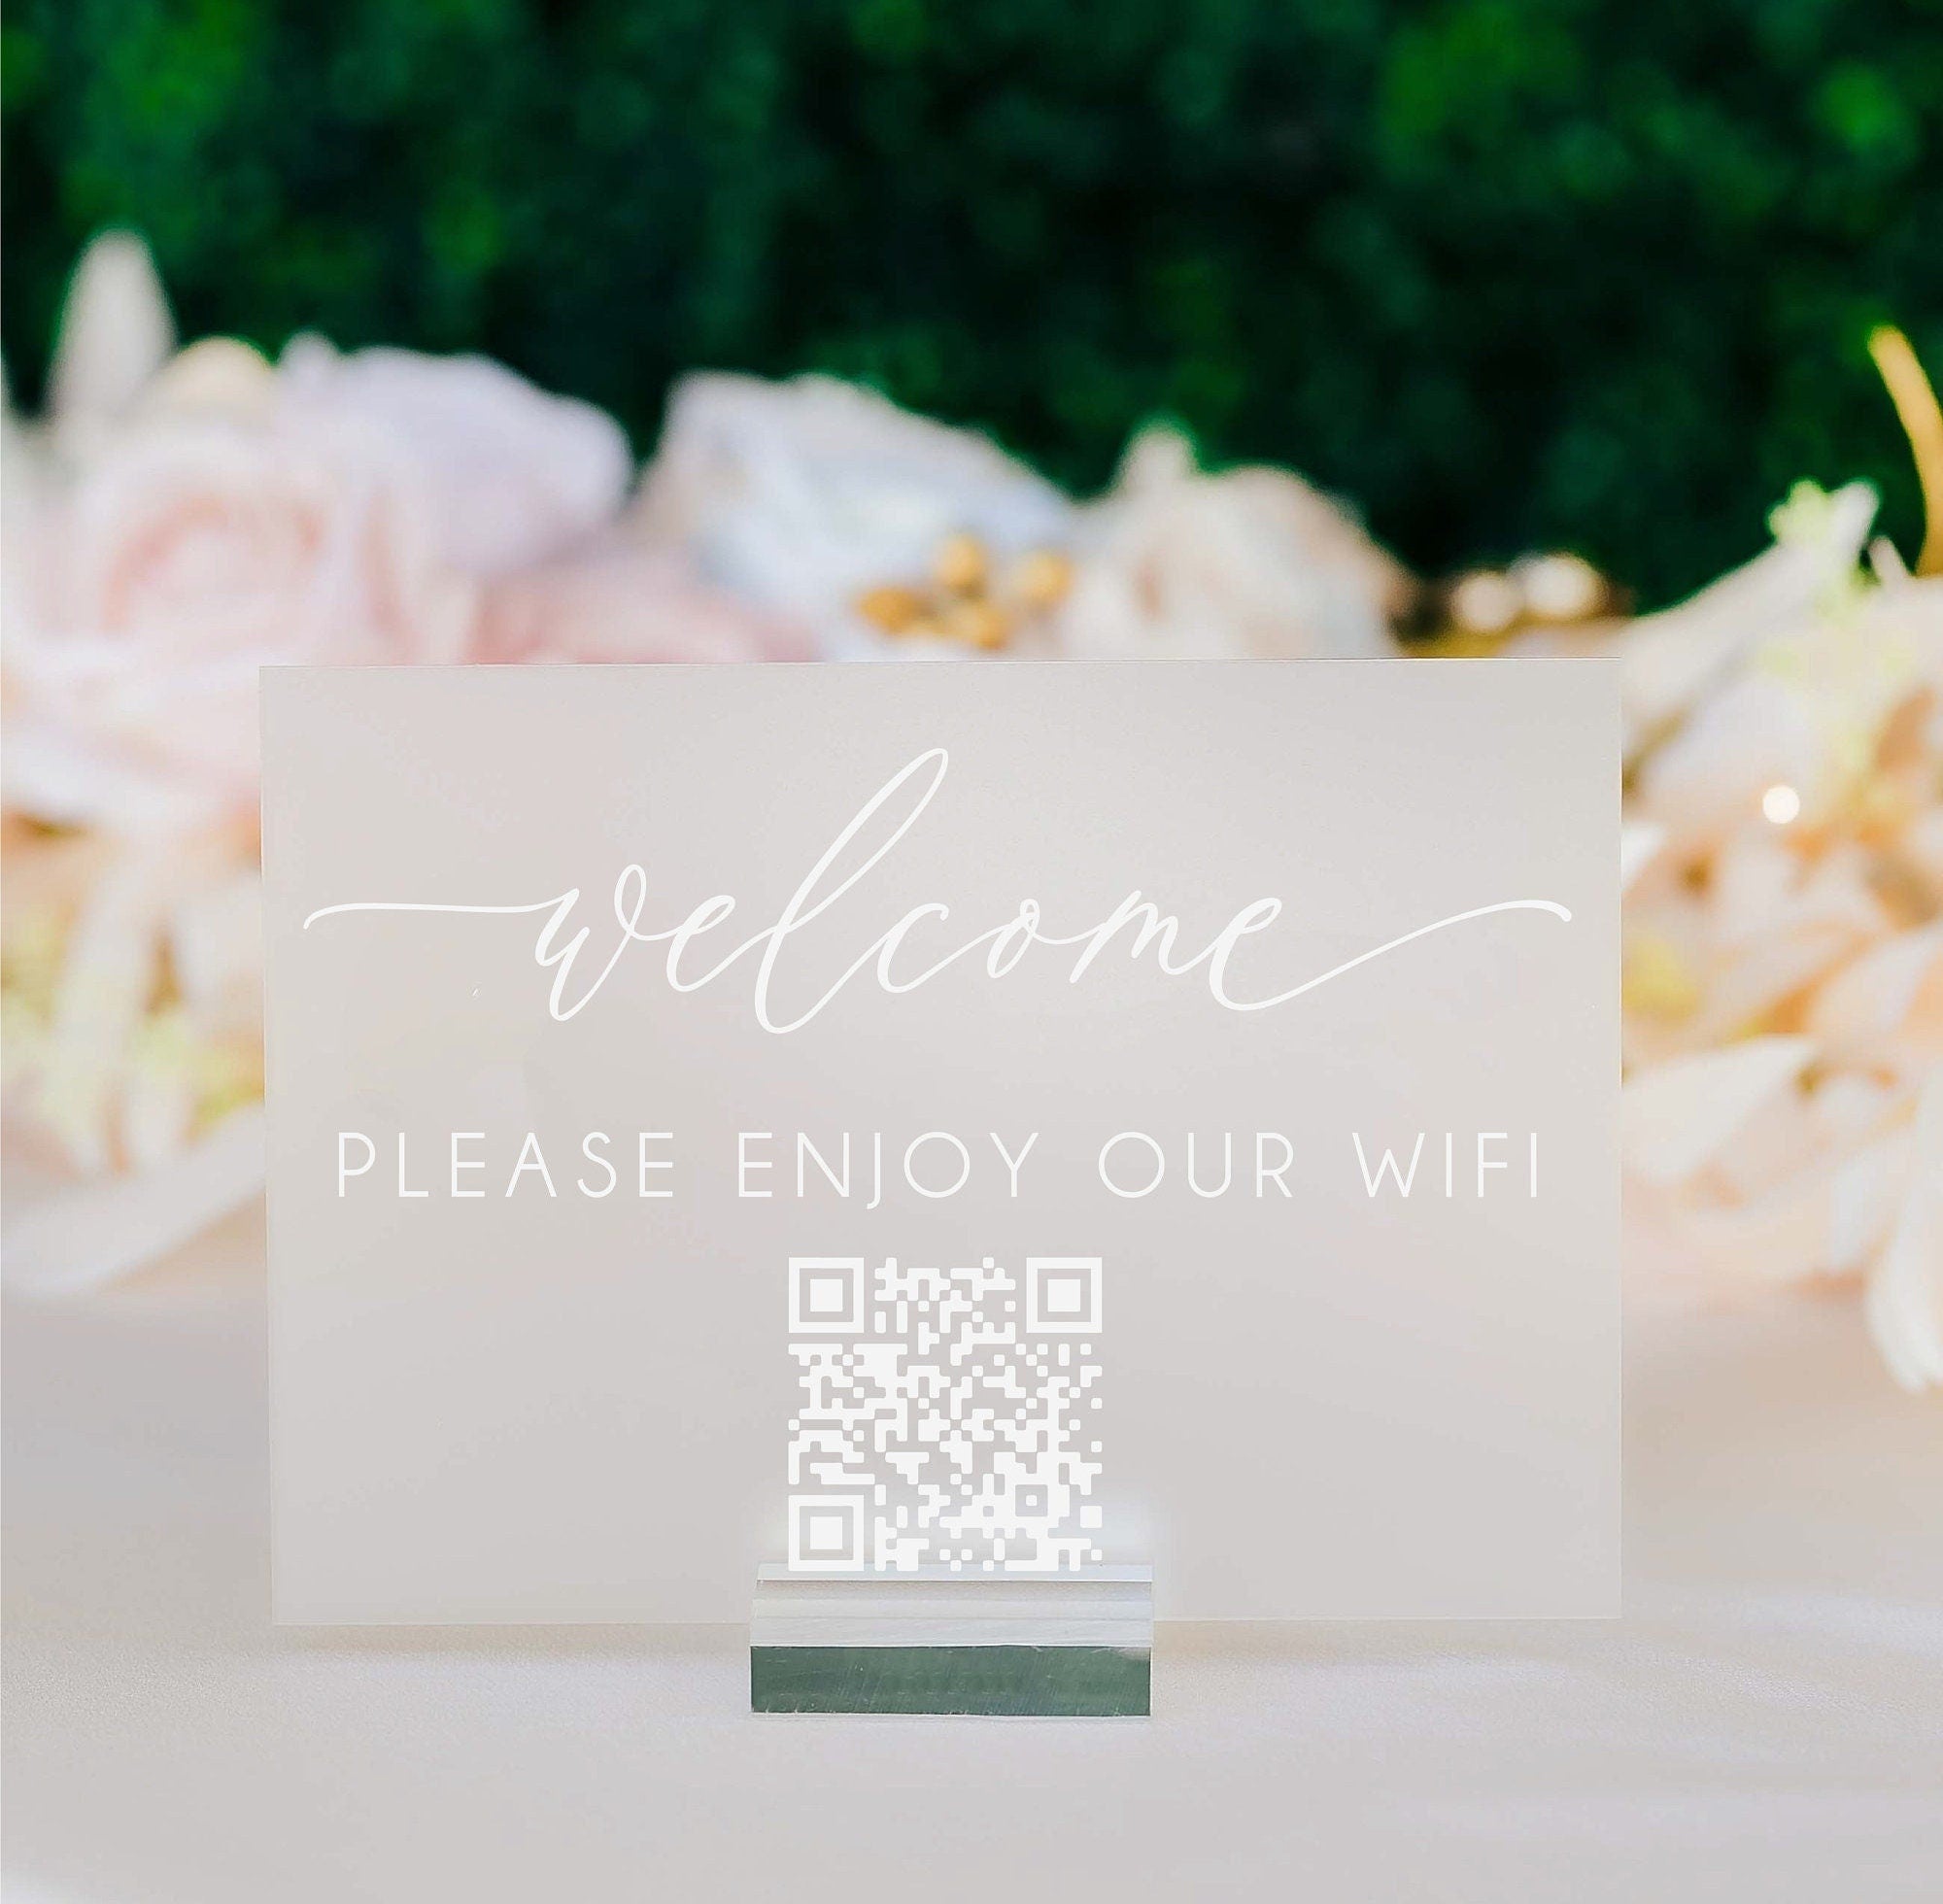 Scannable WIFI QR Code Welcome Please Enjoy Our Wireless Internet Clear Glass Look Acrylic Sign, WIFI Password Plexiglass Perspex Lucite